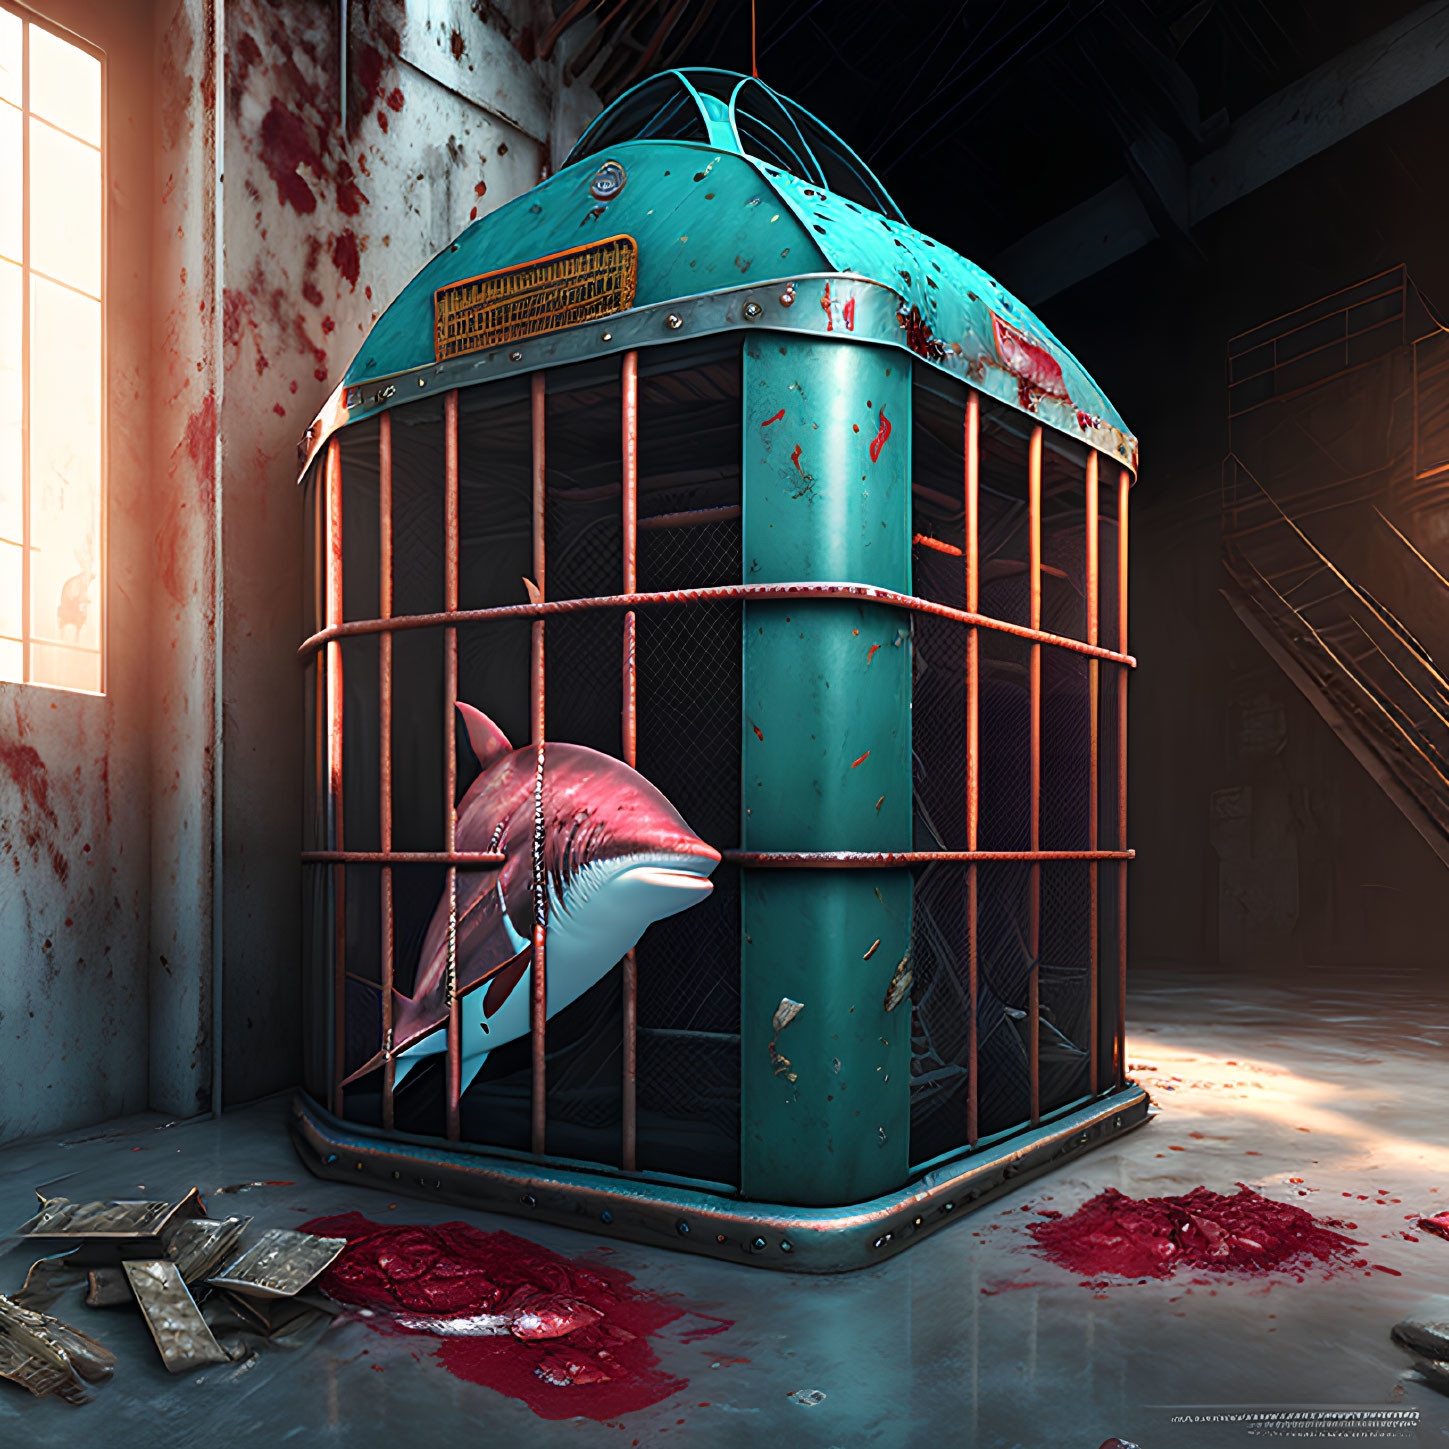 Digital artwork of shark in rusty cage with blood splatter in industrial setting